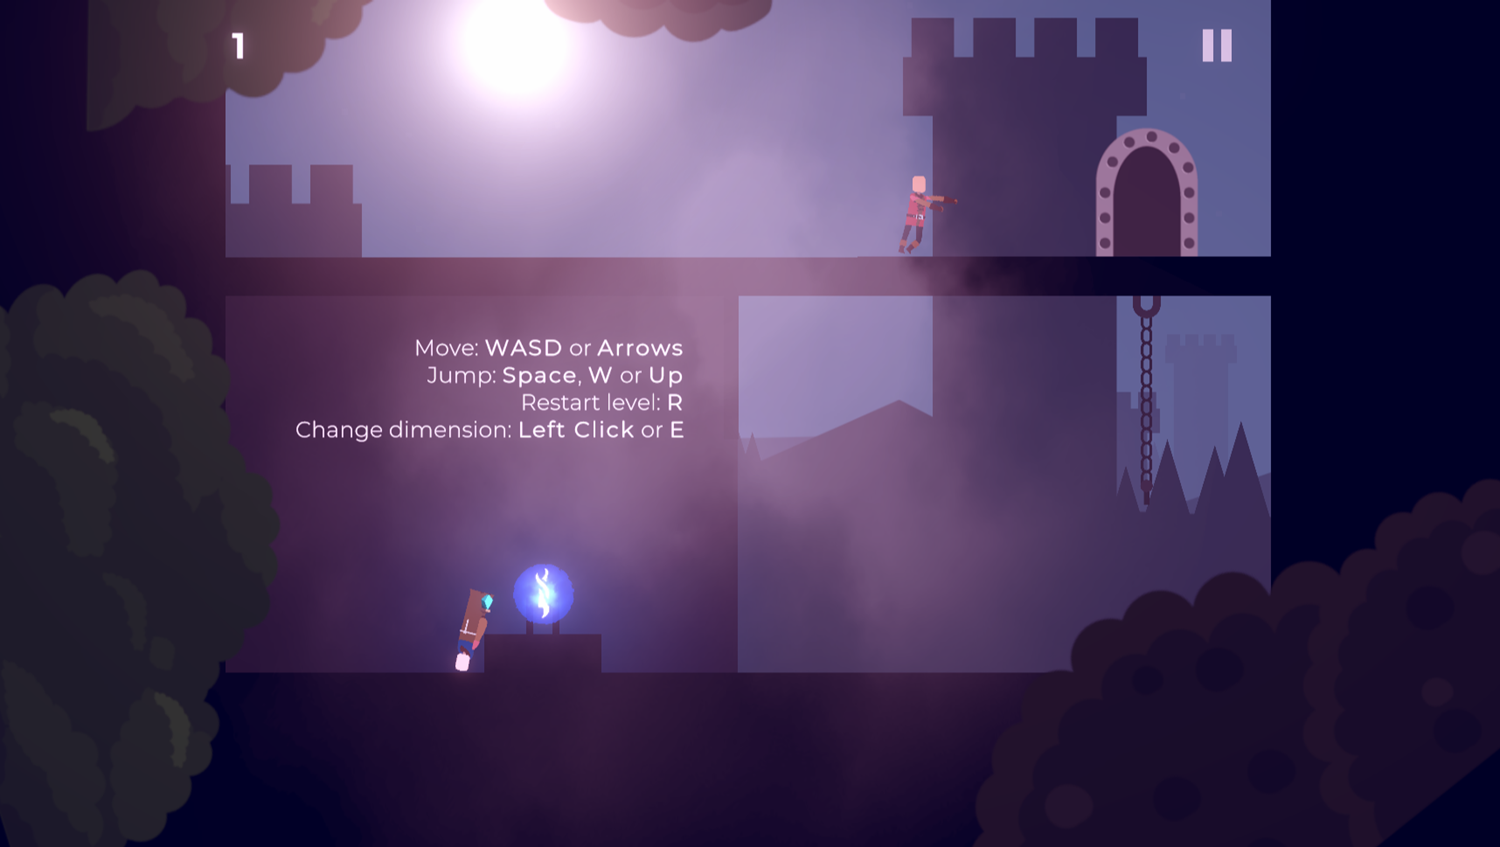 The Mage Game Level Complete Screenshot.